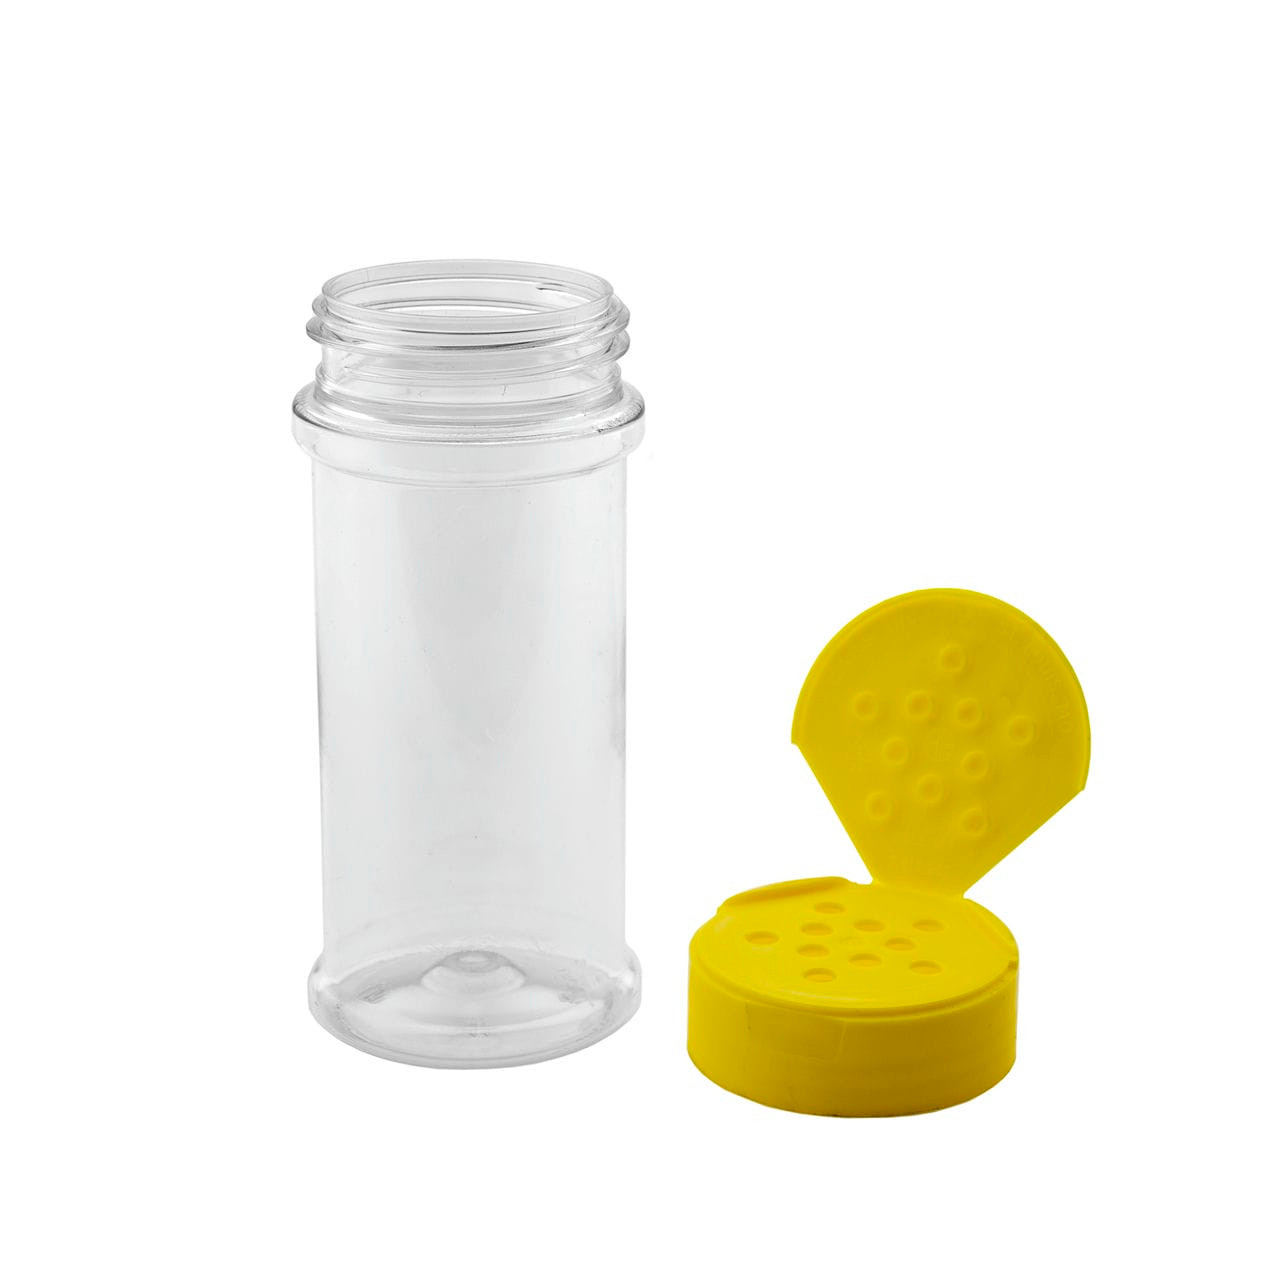 Storage Bottles 8Oz Airtight Square Spice Containers Empty Seasoning Jars  For Salt Sugar From Xieroban, $46.53